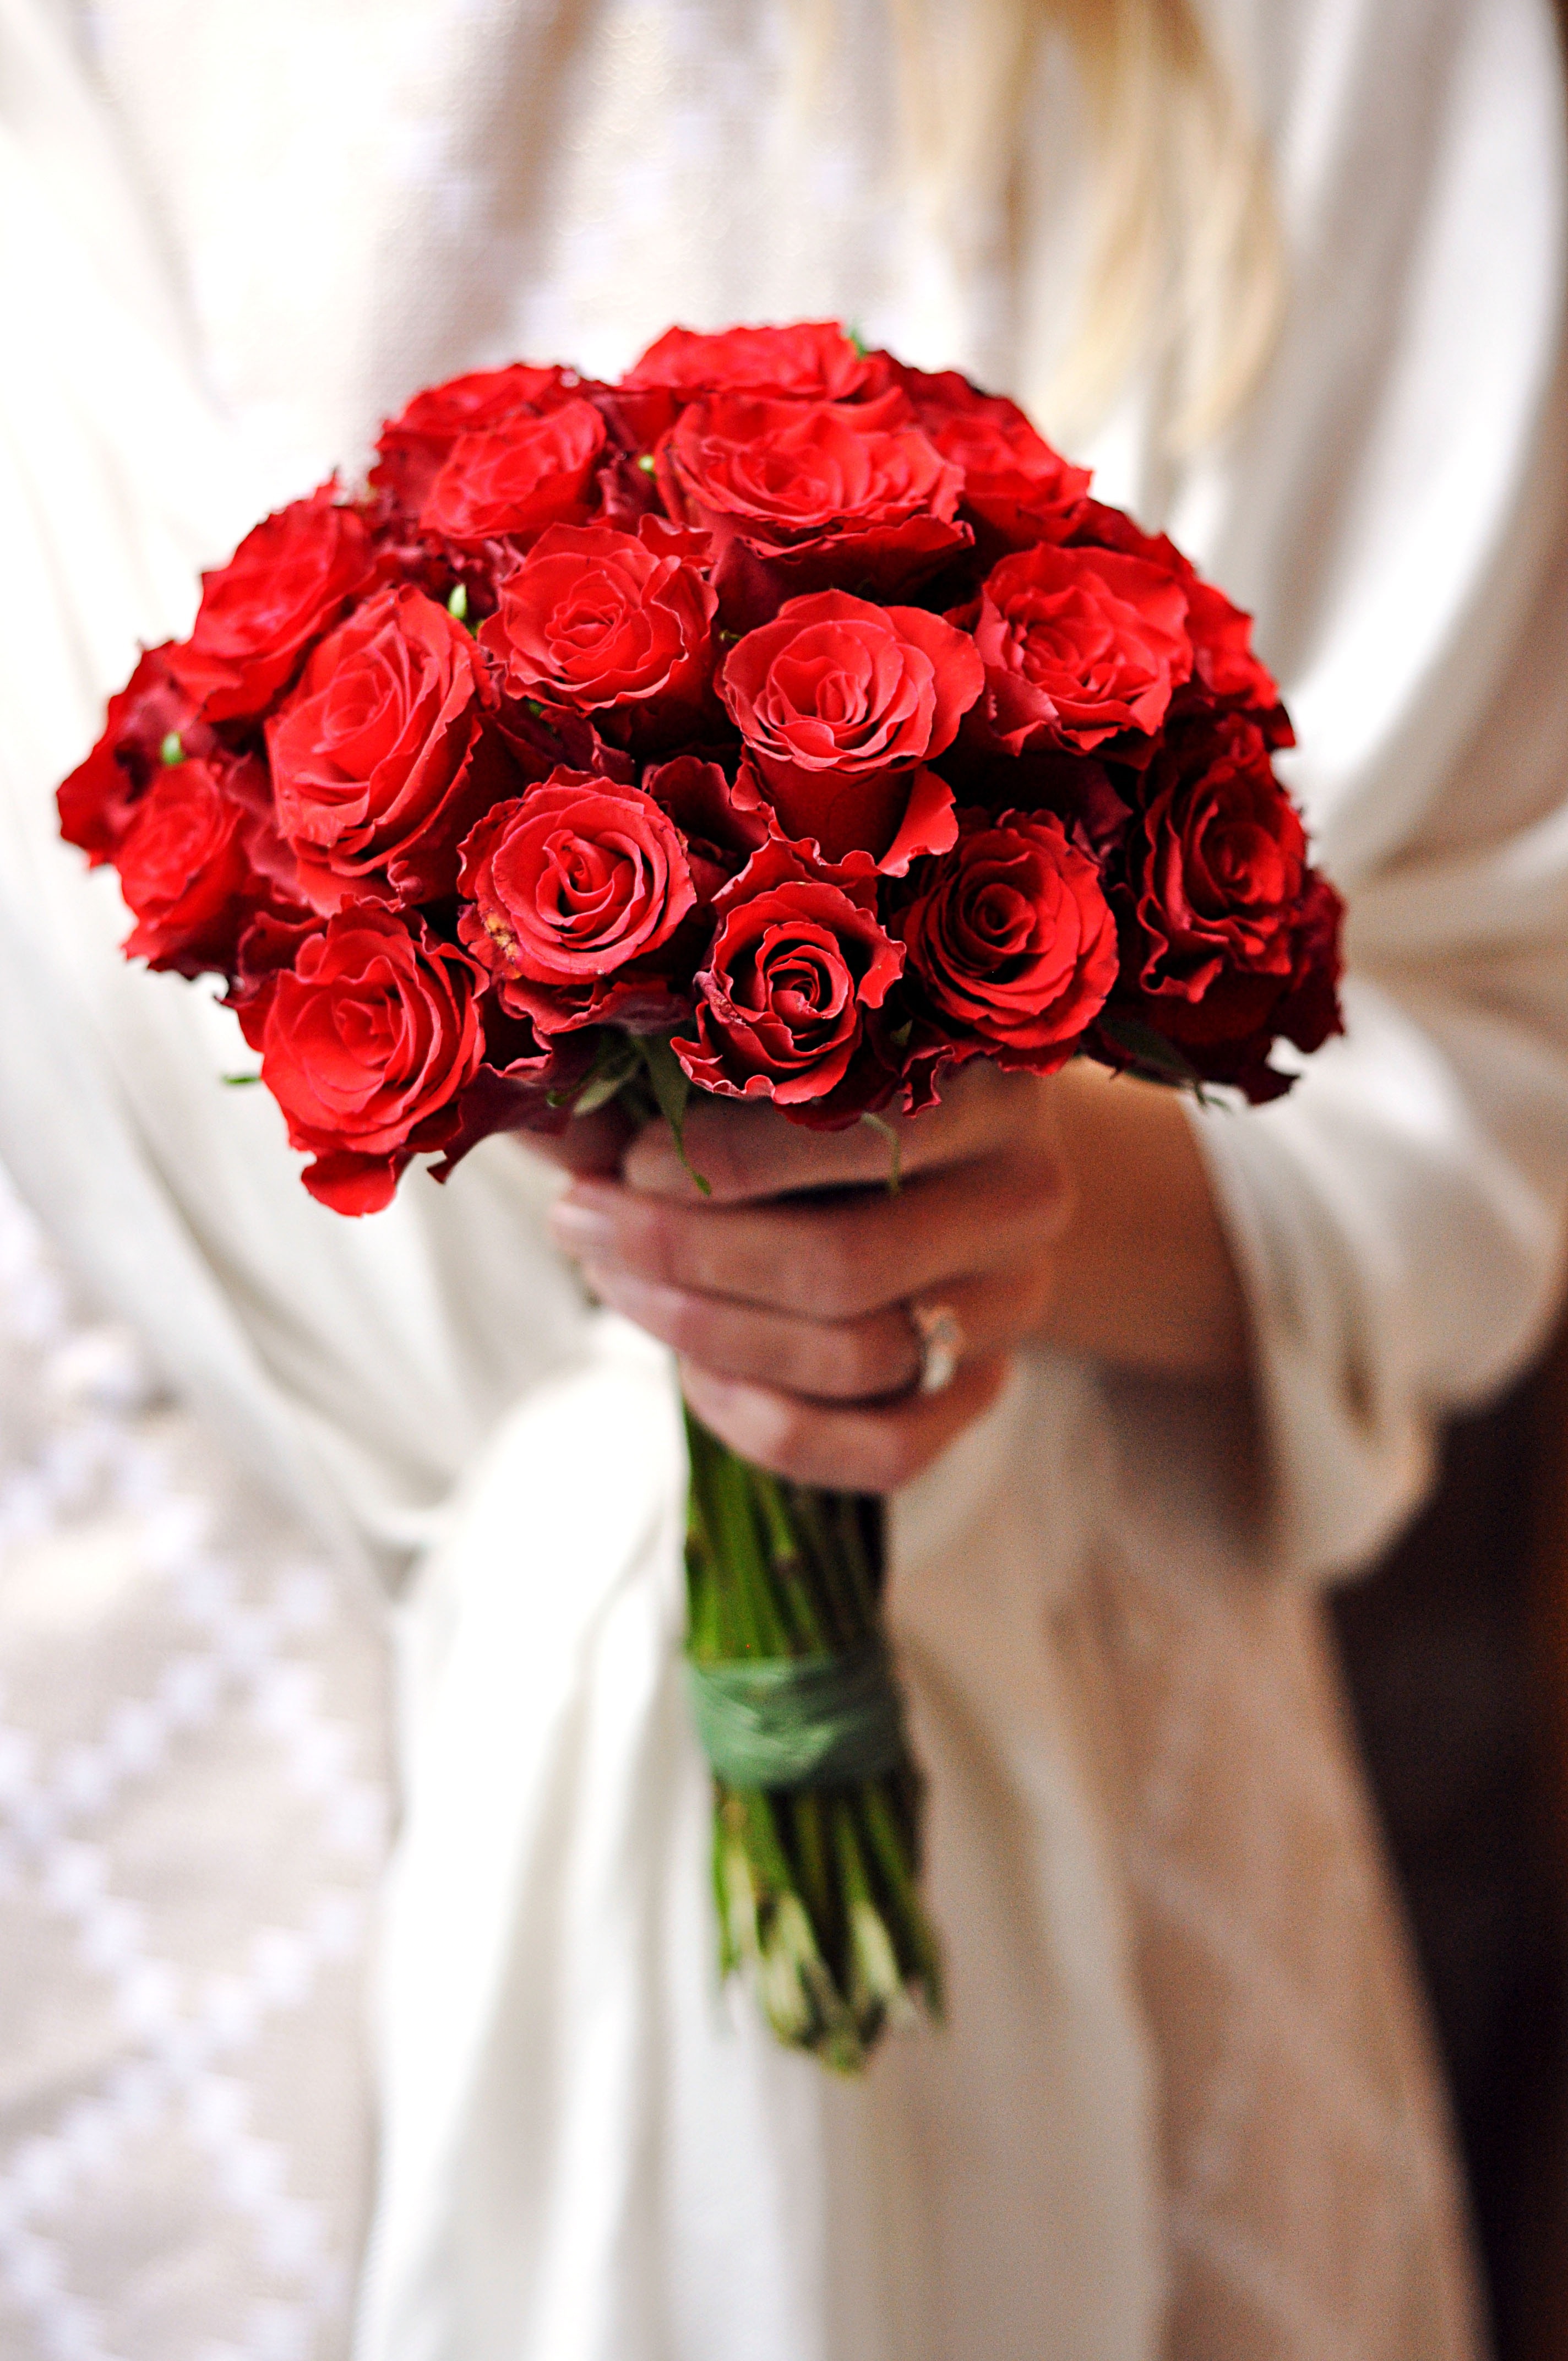 woman holding a red rose bouquet